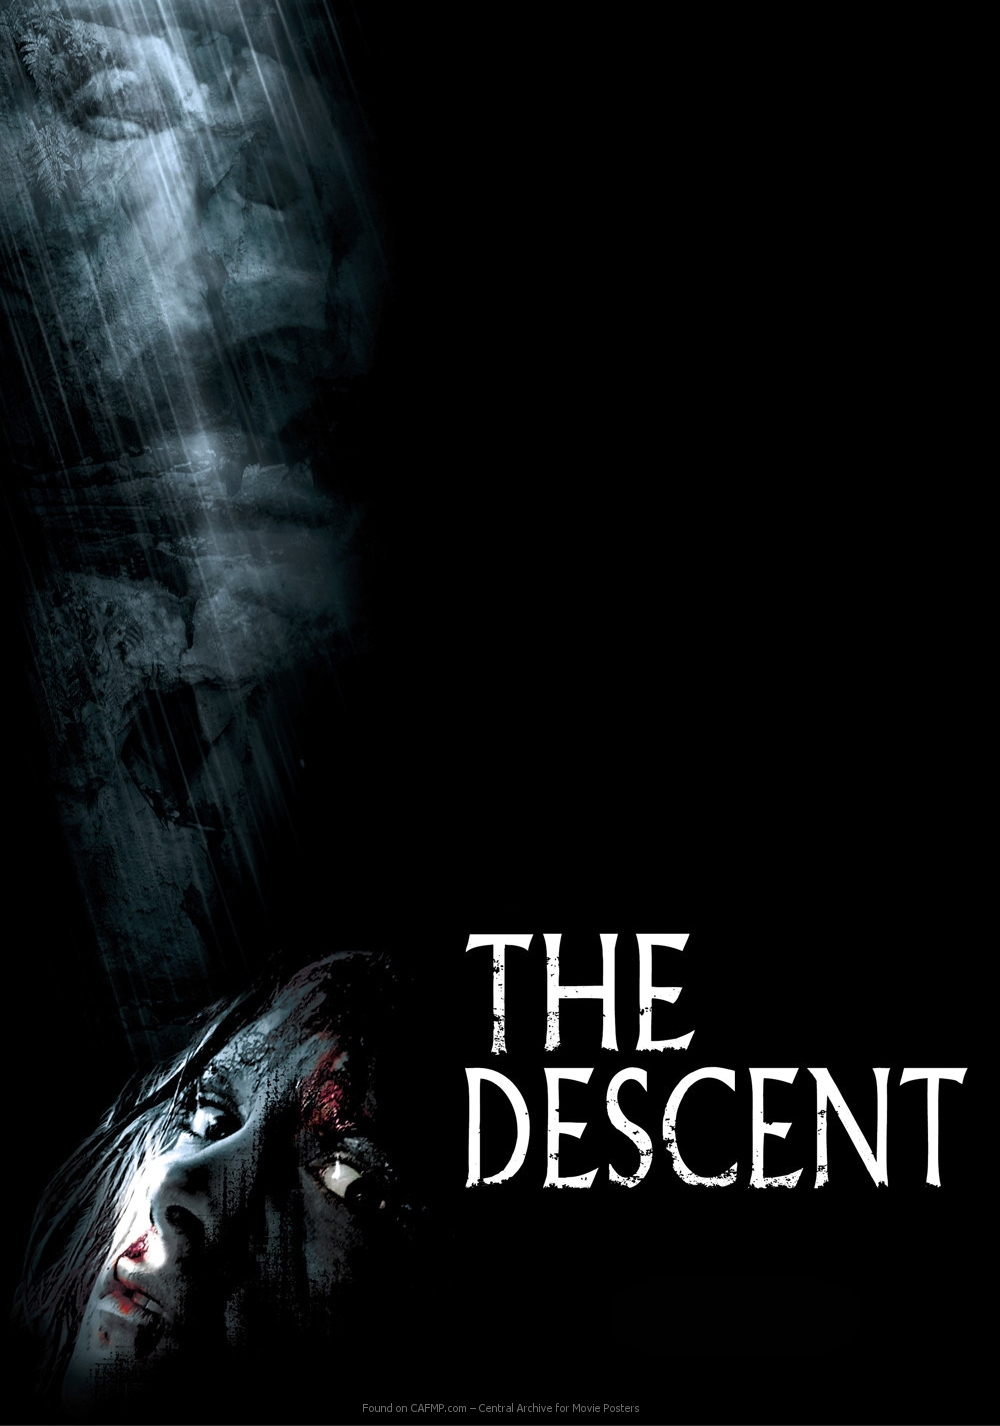 the descent full movie online watch